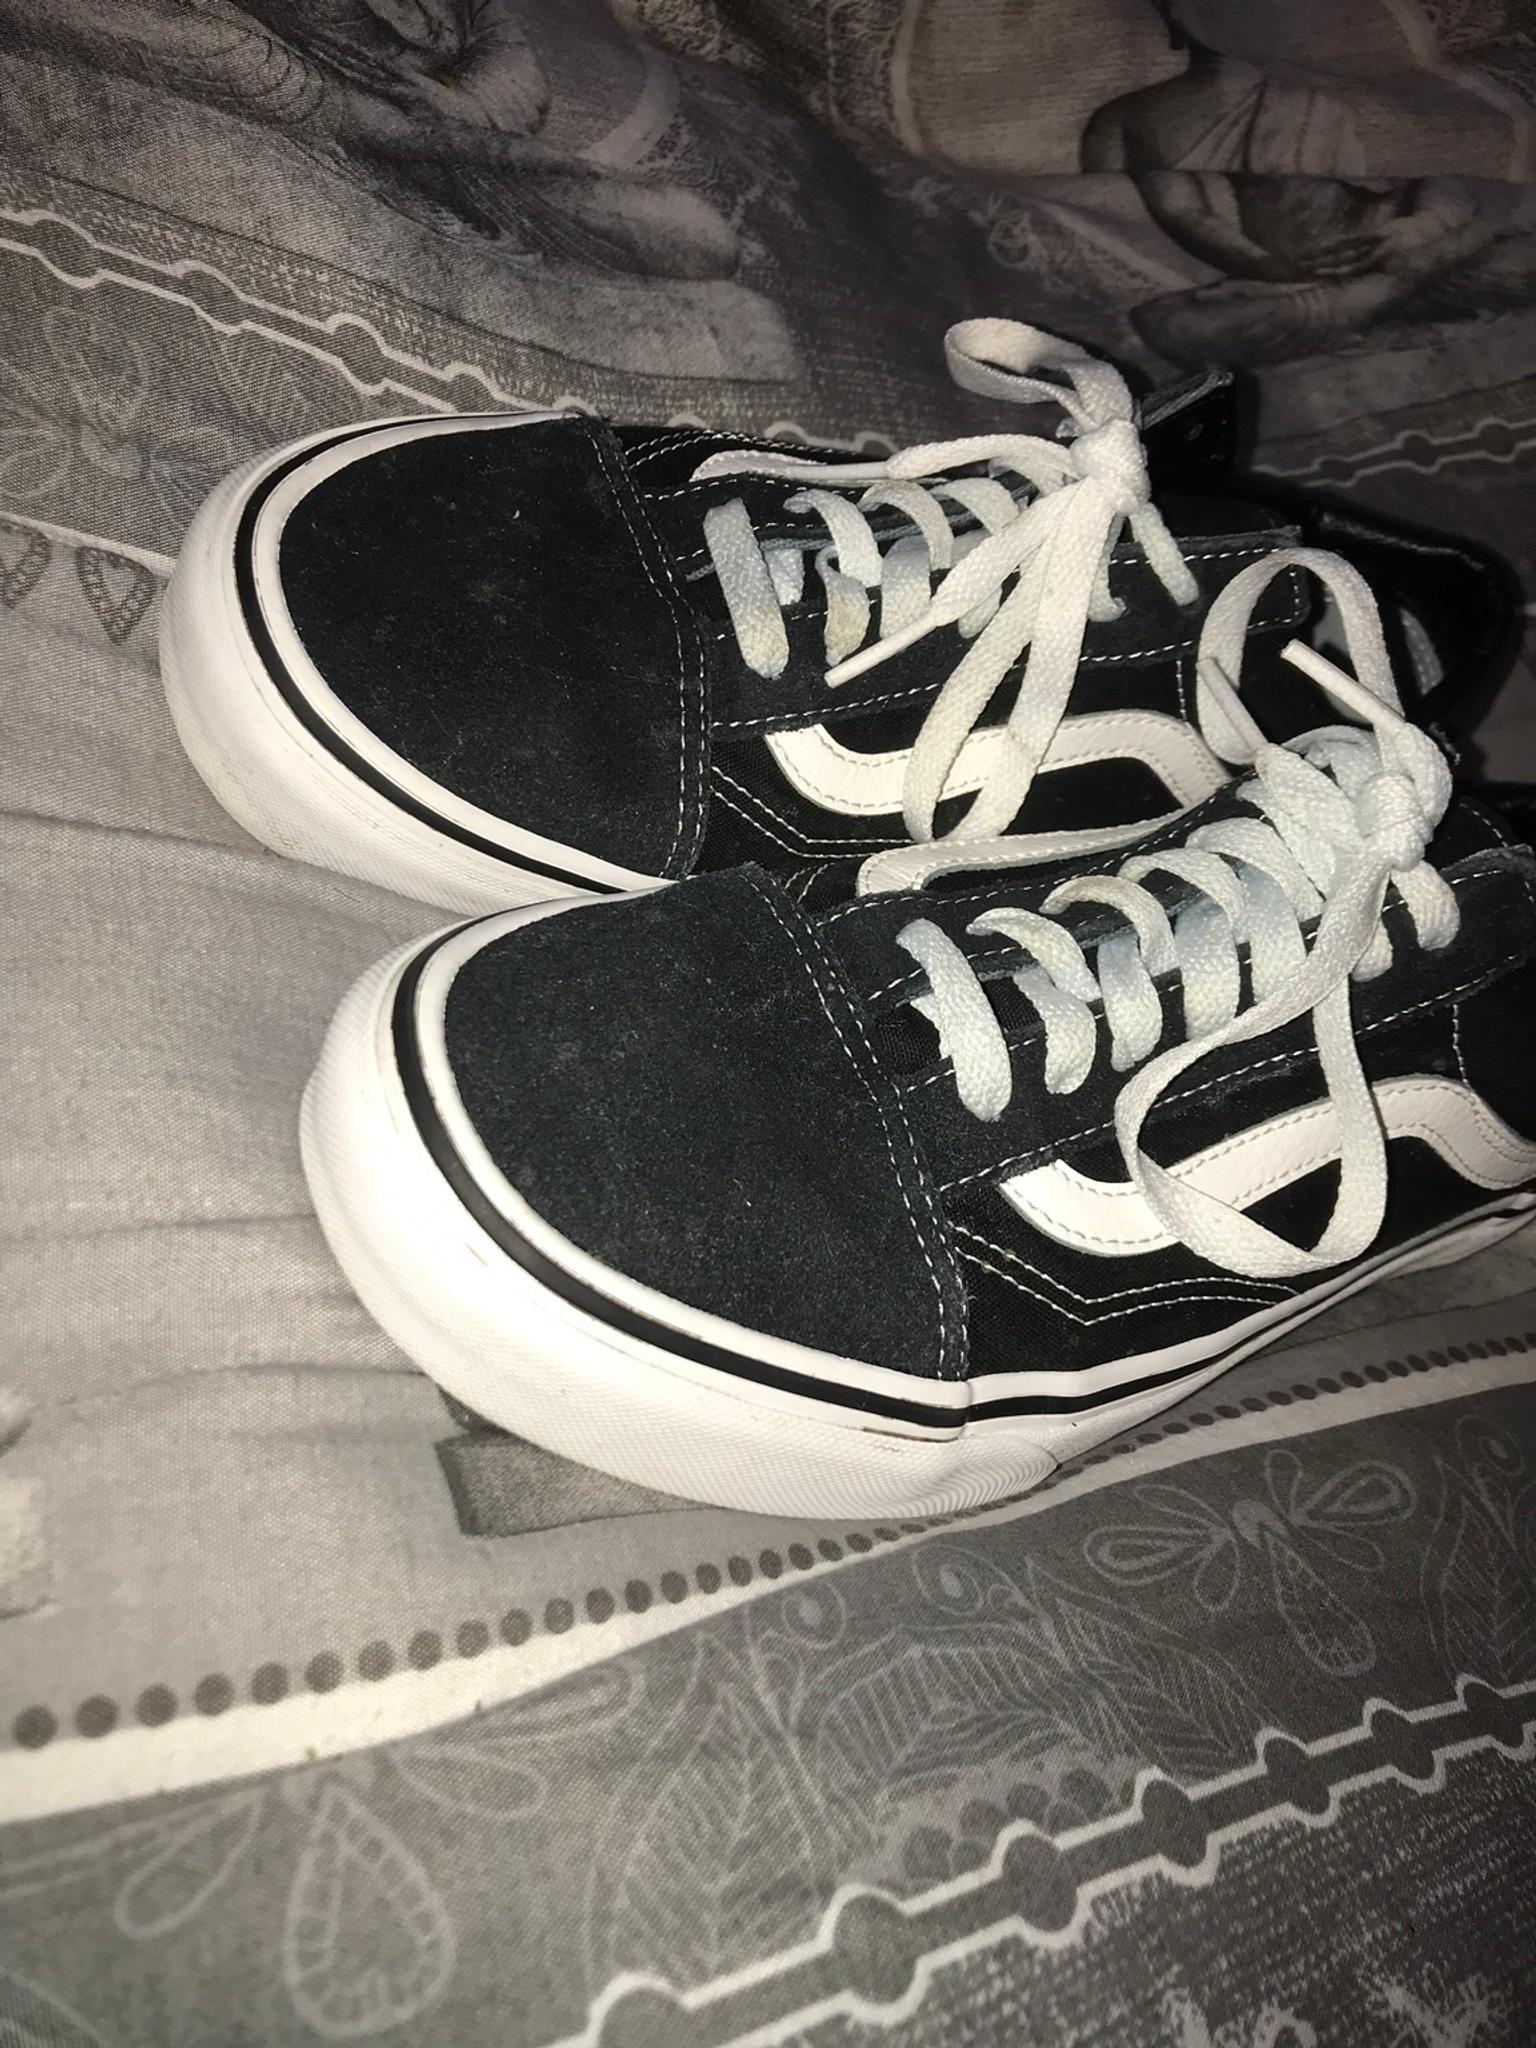 black and white vans size 7